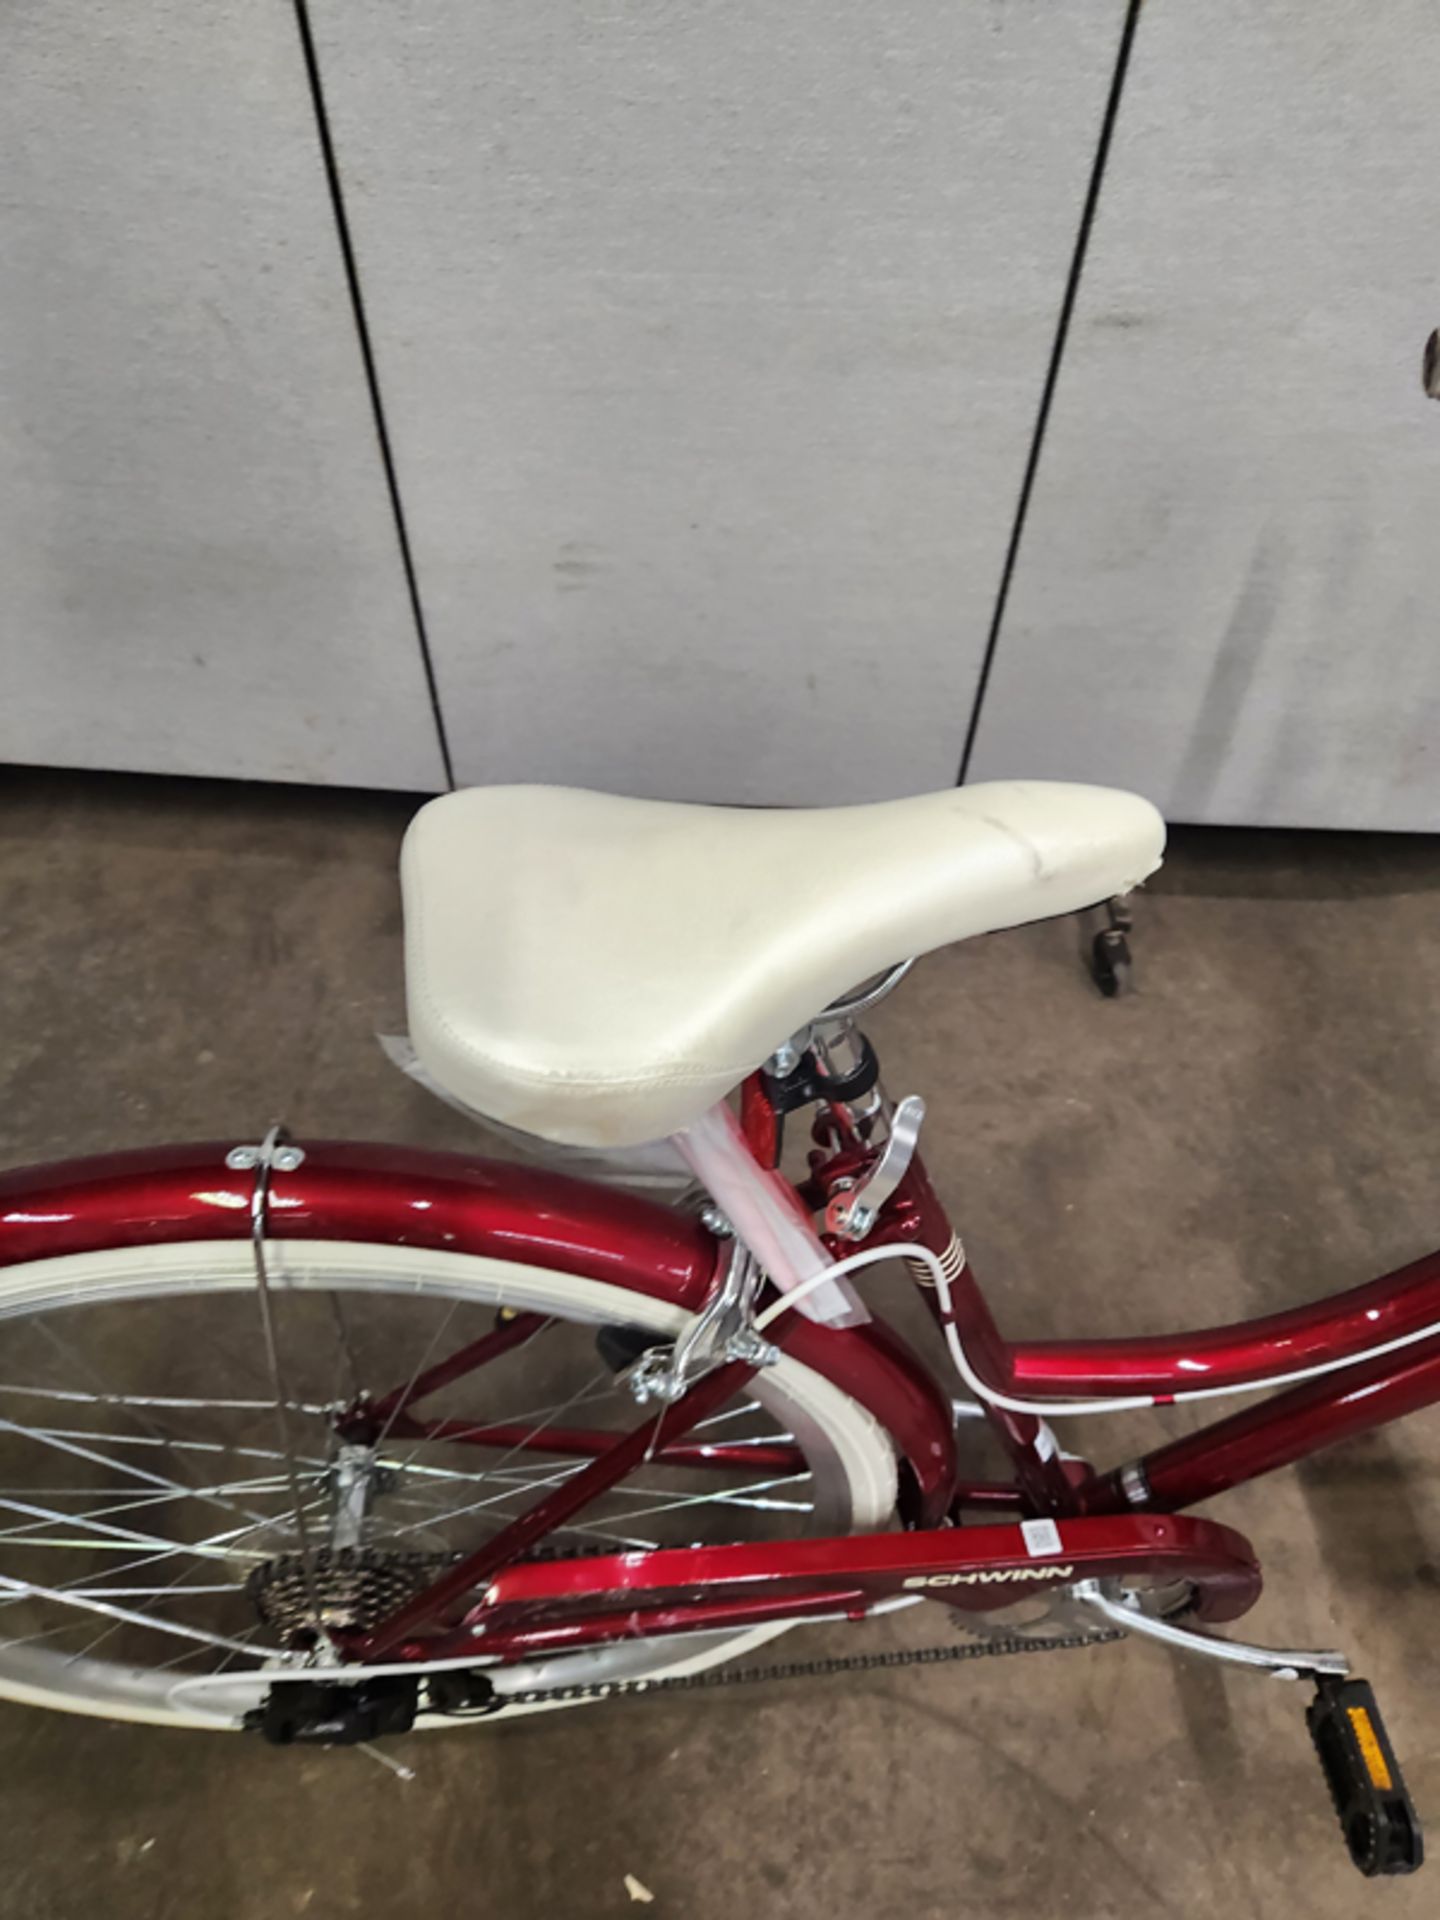 SCHWINN AMHERST BICYCLE MODEL: S5741AC - SCRATCH AND DENT - BENT REAR FENDER - Image 7 of 13